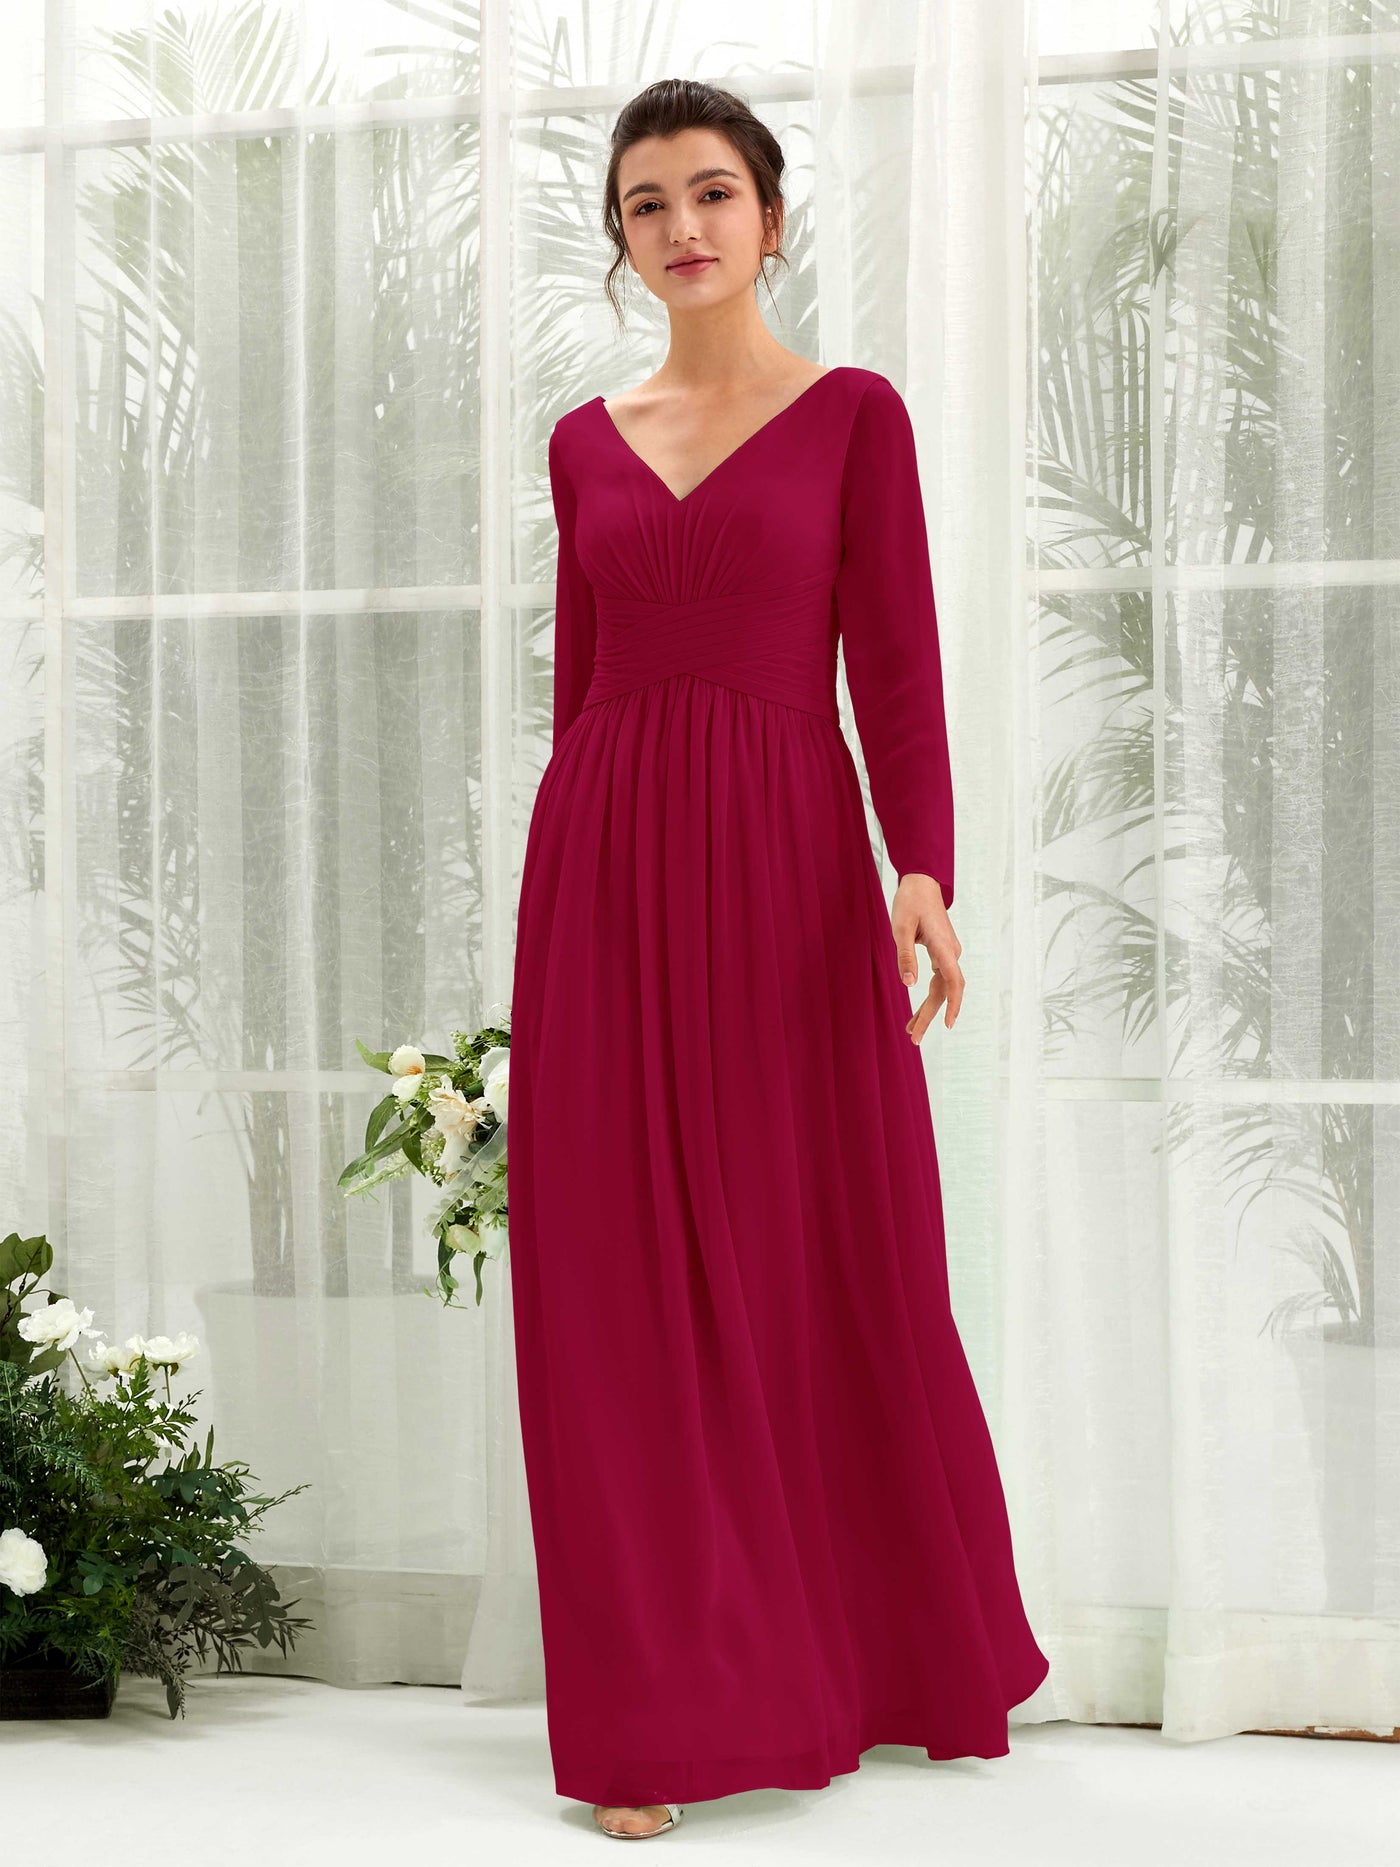 Jester Red Bridesmaid Dresses Bridesmaid Dress A-line Chiffon V-neck Full Length Long Sleeves Wedding Party Dress (81220341)#color_jester-red